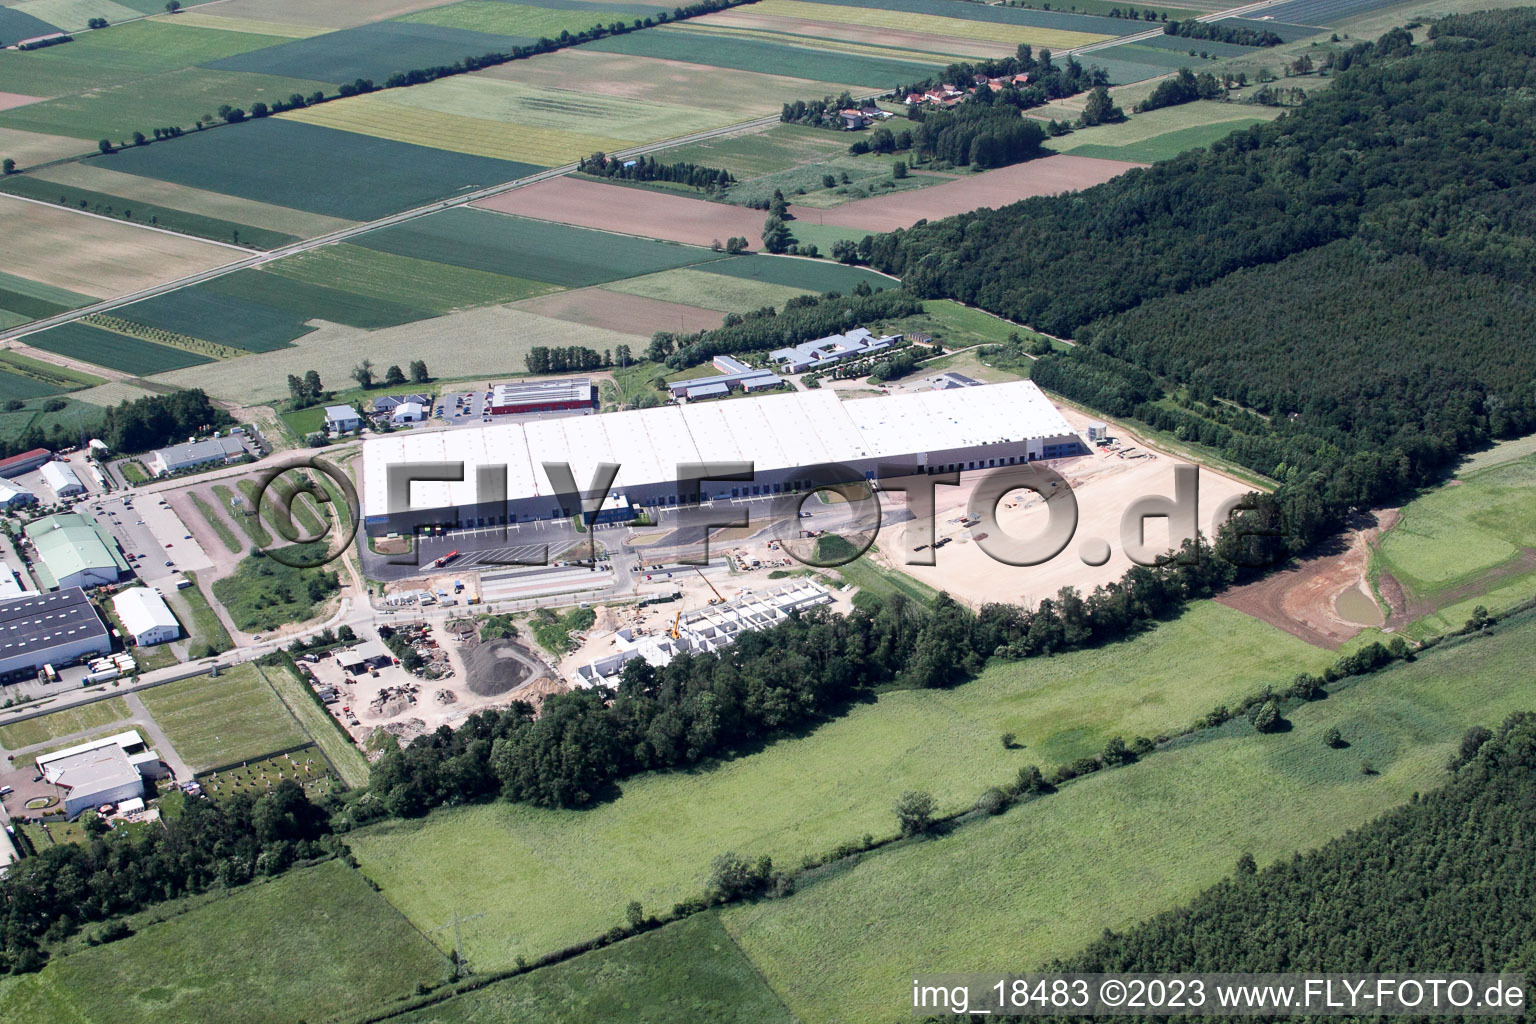 Coincidence logistics center in the district Minderslachen in Kandel in the state Rhineland-Palatinate, Germany viewn from the air